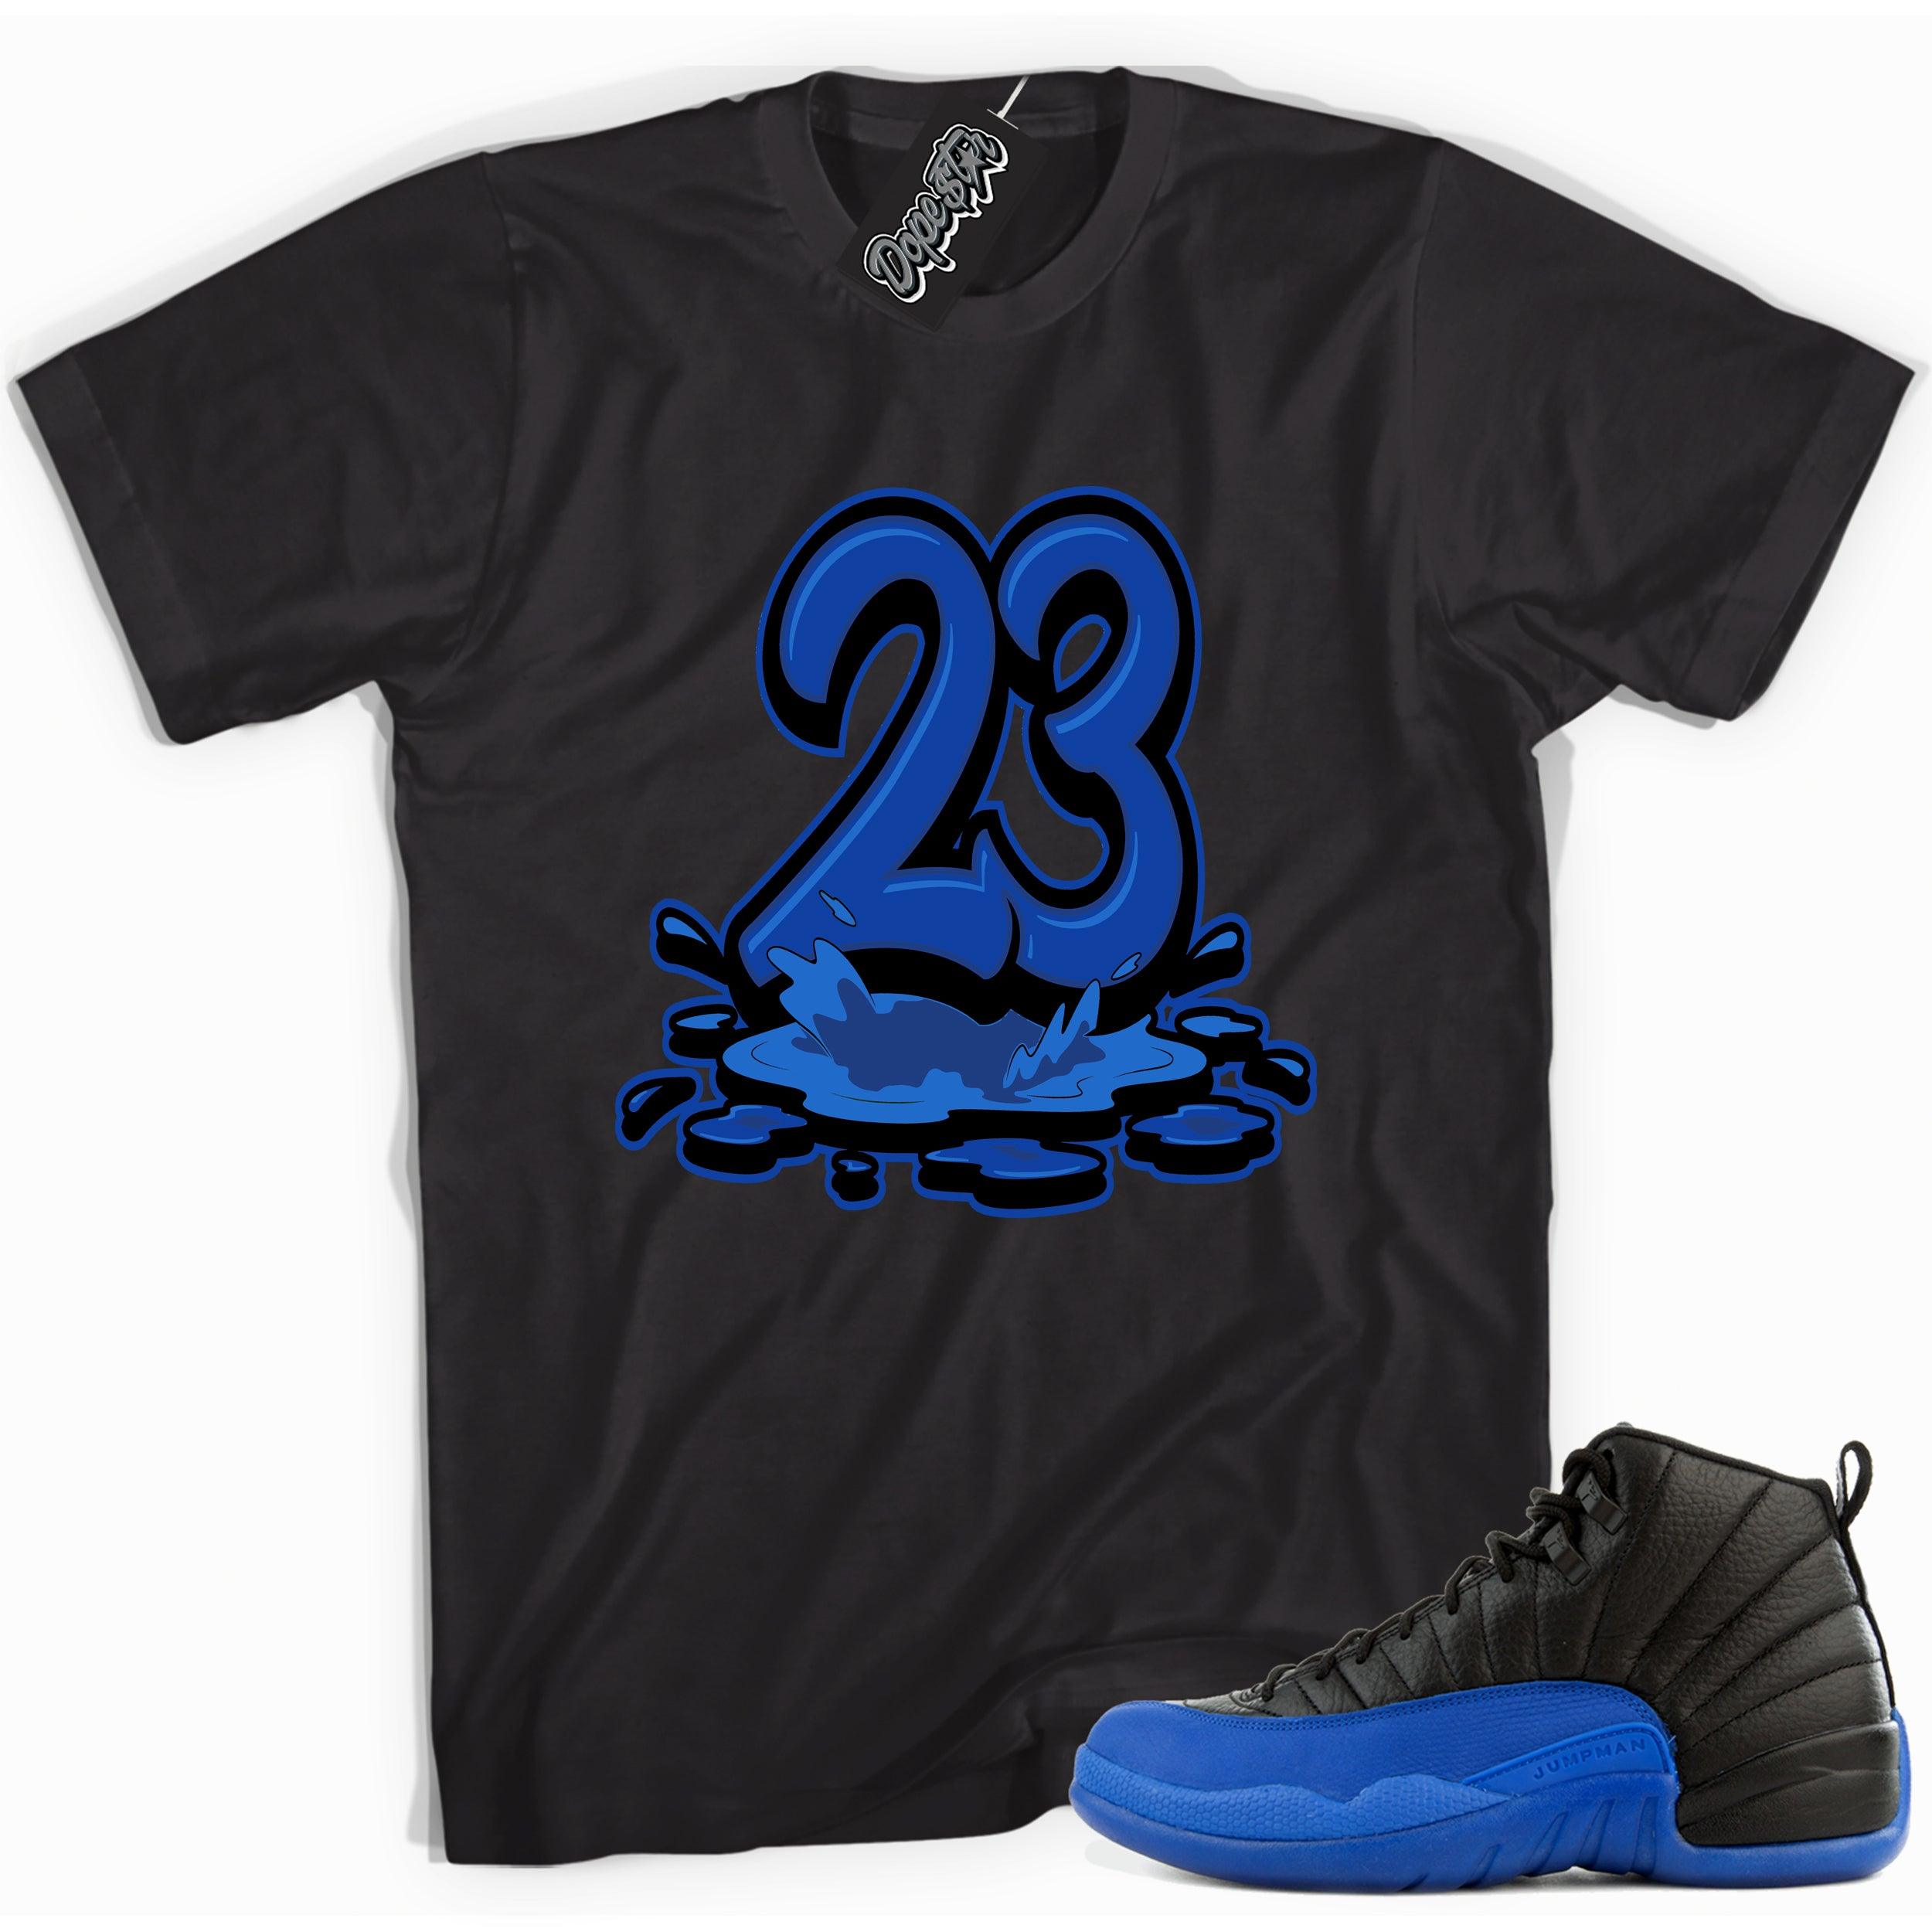 Cool black graphic tee with 'melting 23' print, that perfectly matches  Air Jordan 12 Retro Black Game Royal sneakers.